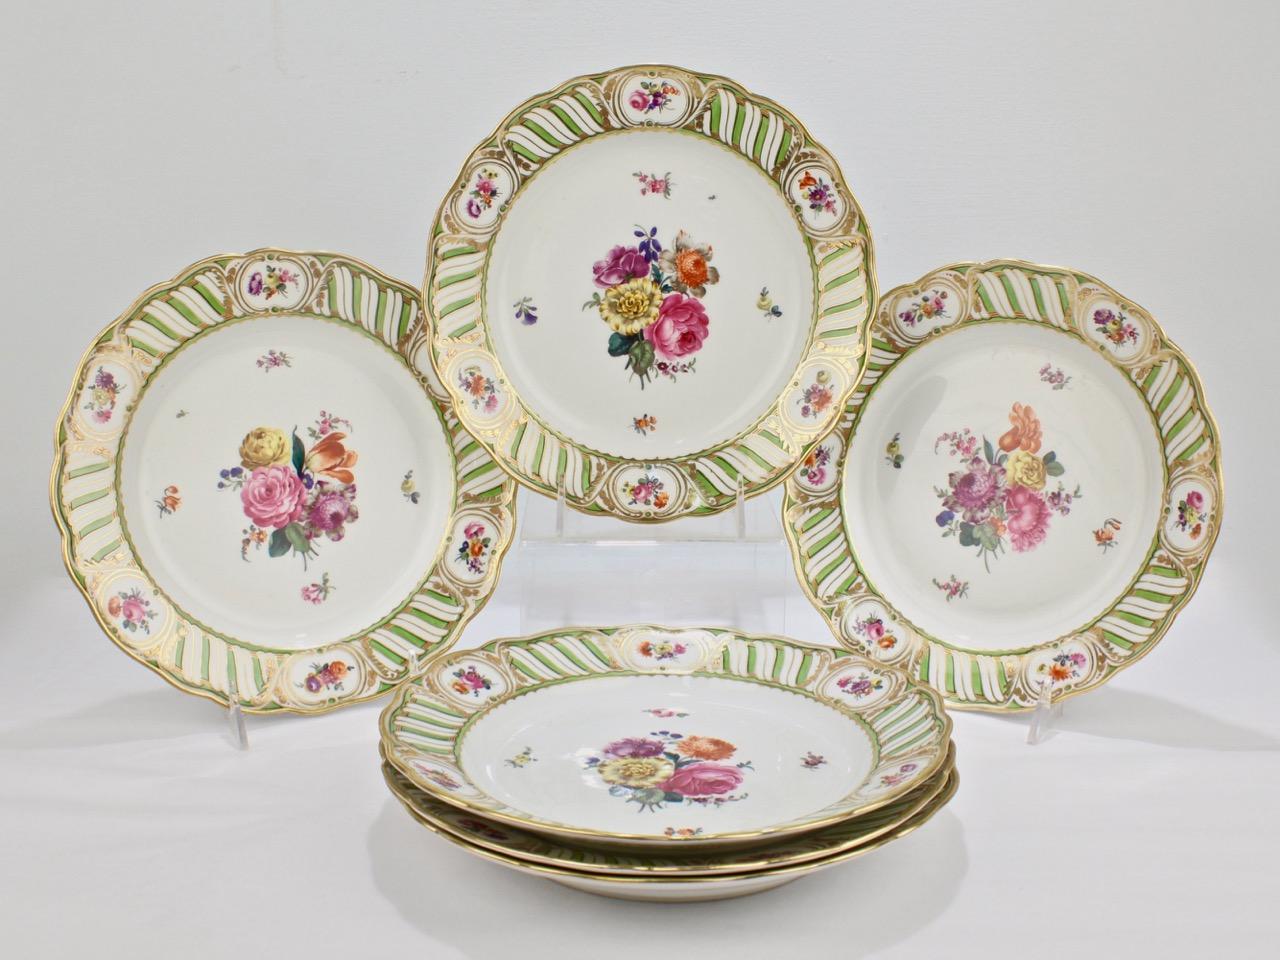 A sophisticated set of 6 antique Vienna porcelain plates.

Each having a green and white border with floral cartouches and finely painted Deutsche Blumen floral sprays to the centers.

Simply top shelf quality. Perfect for the table or